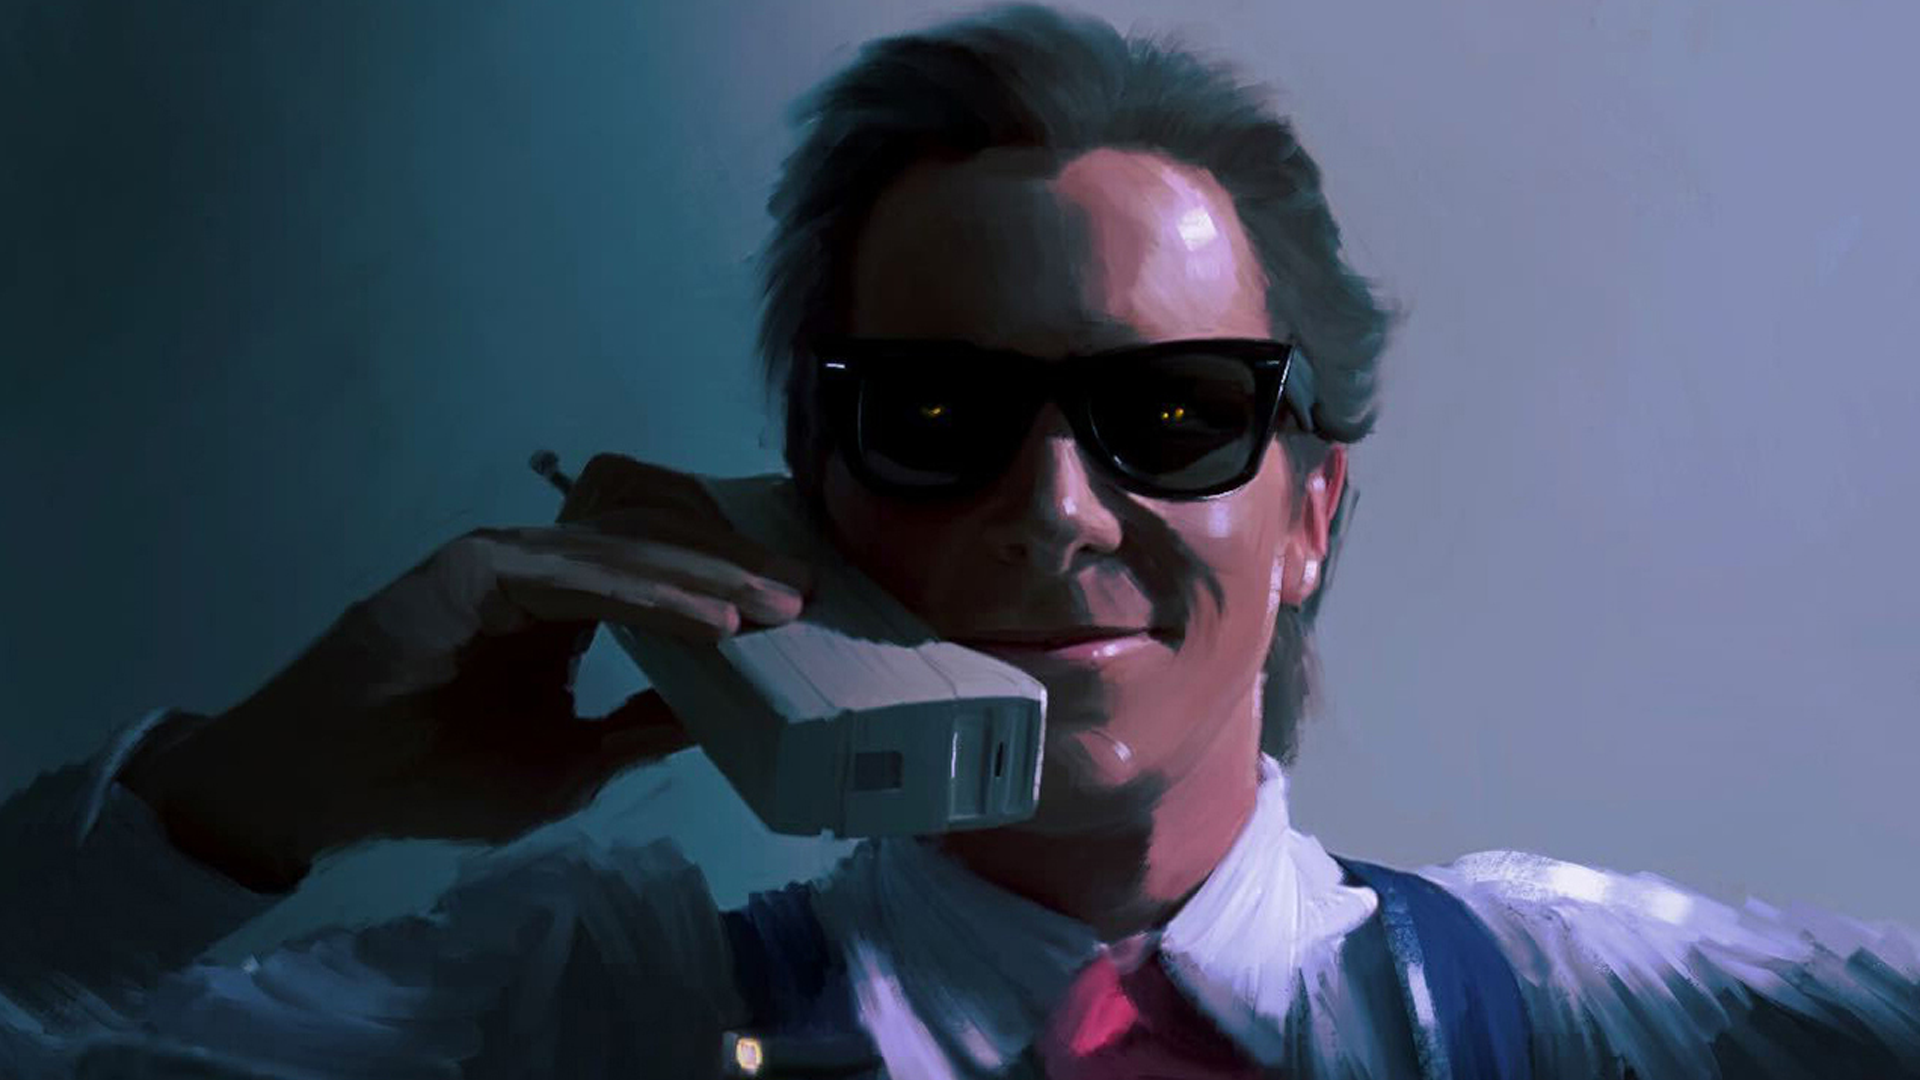 Download American Psycho wallpapers for iPhone  iGeeksBlog